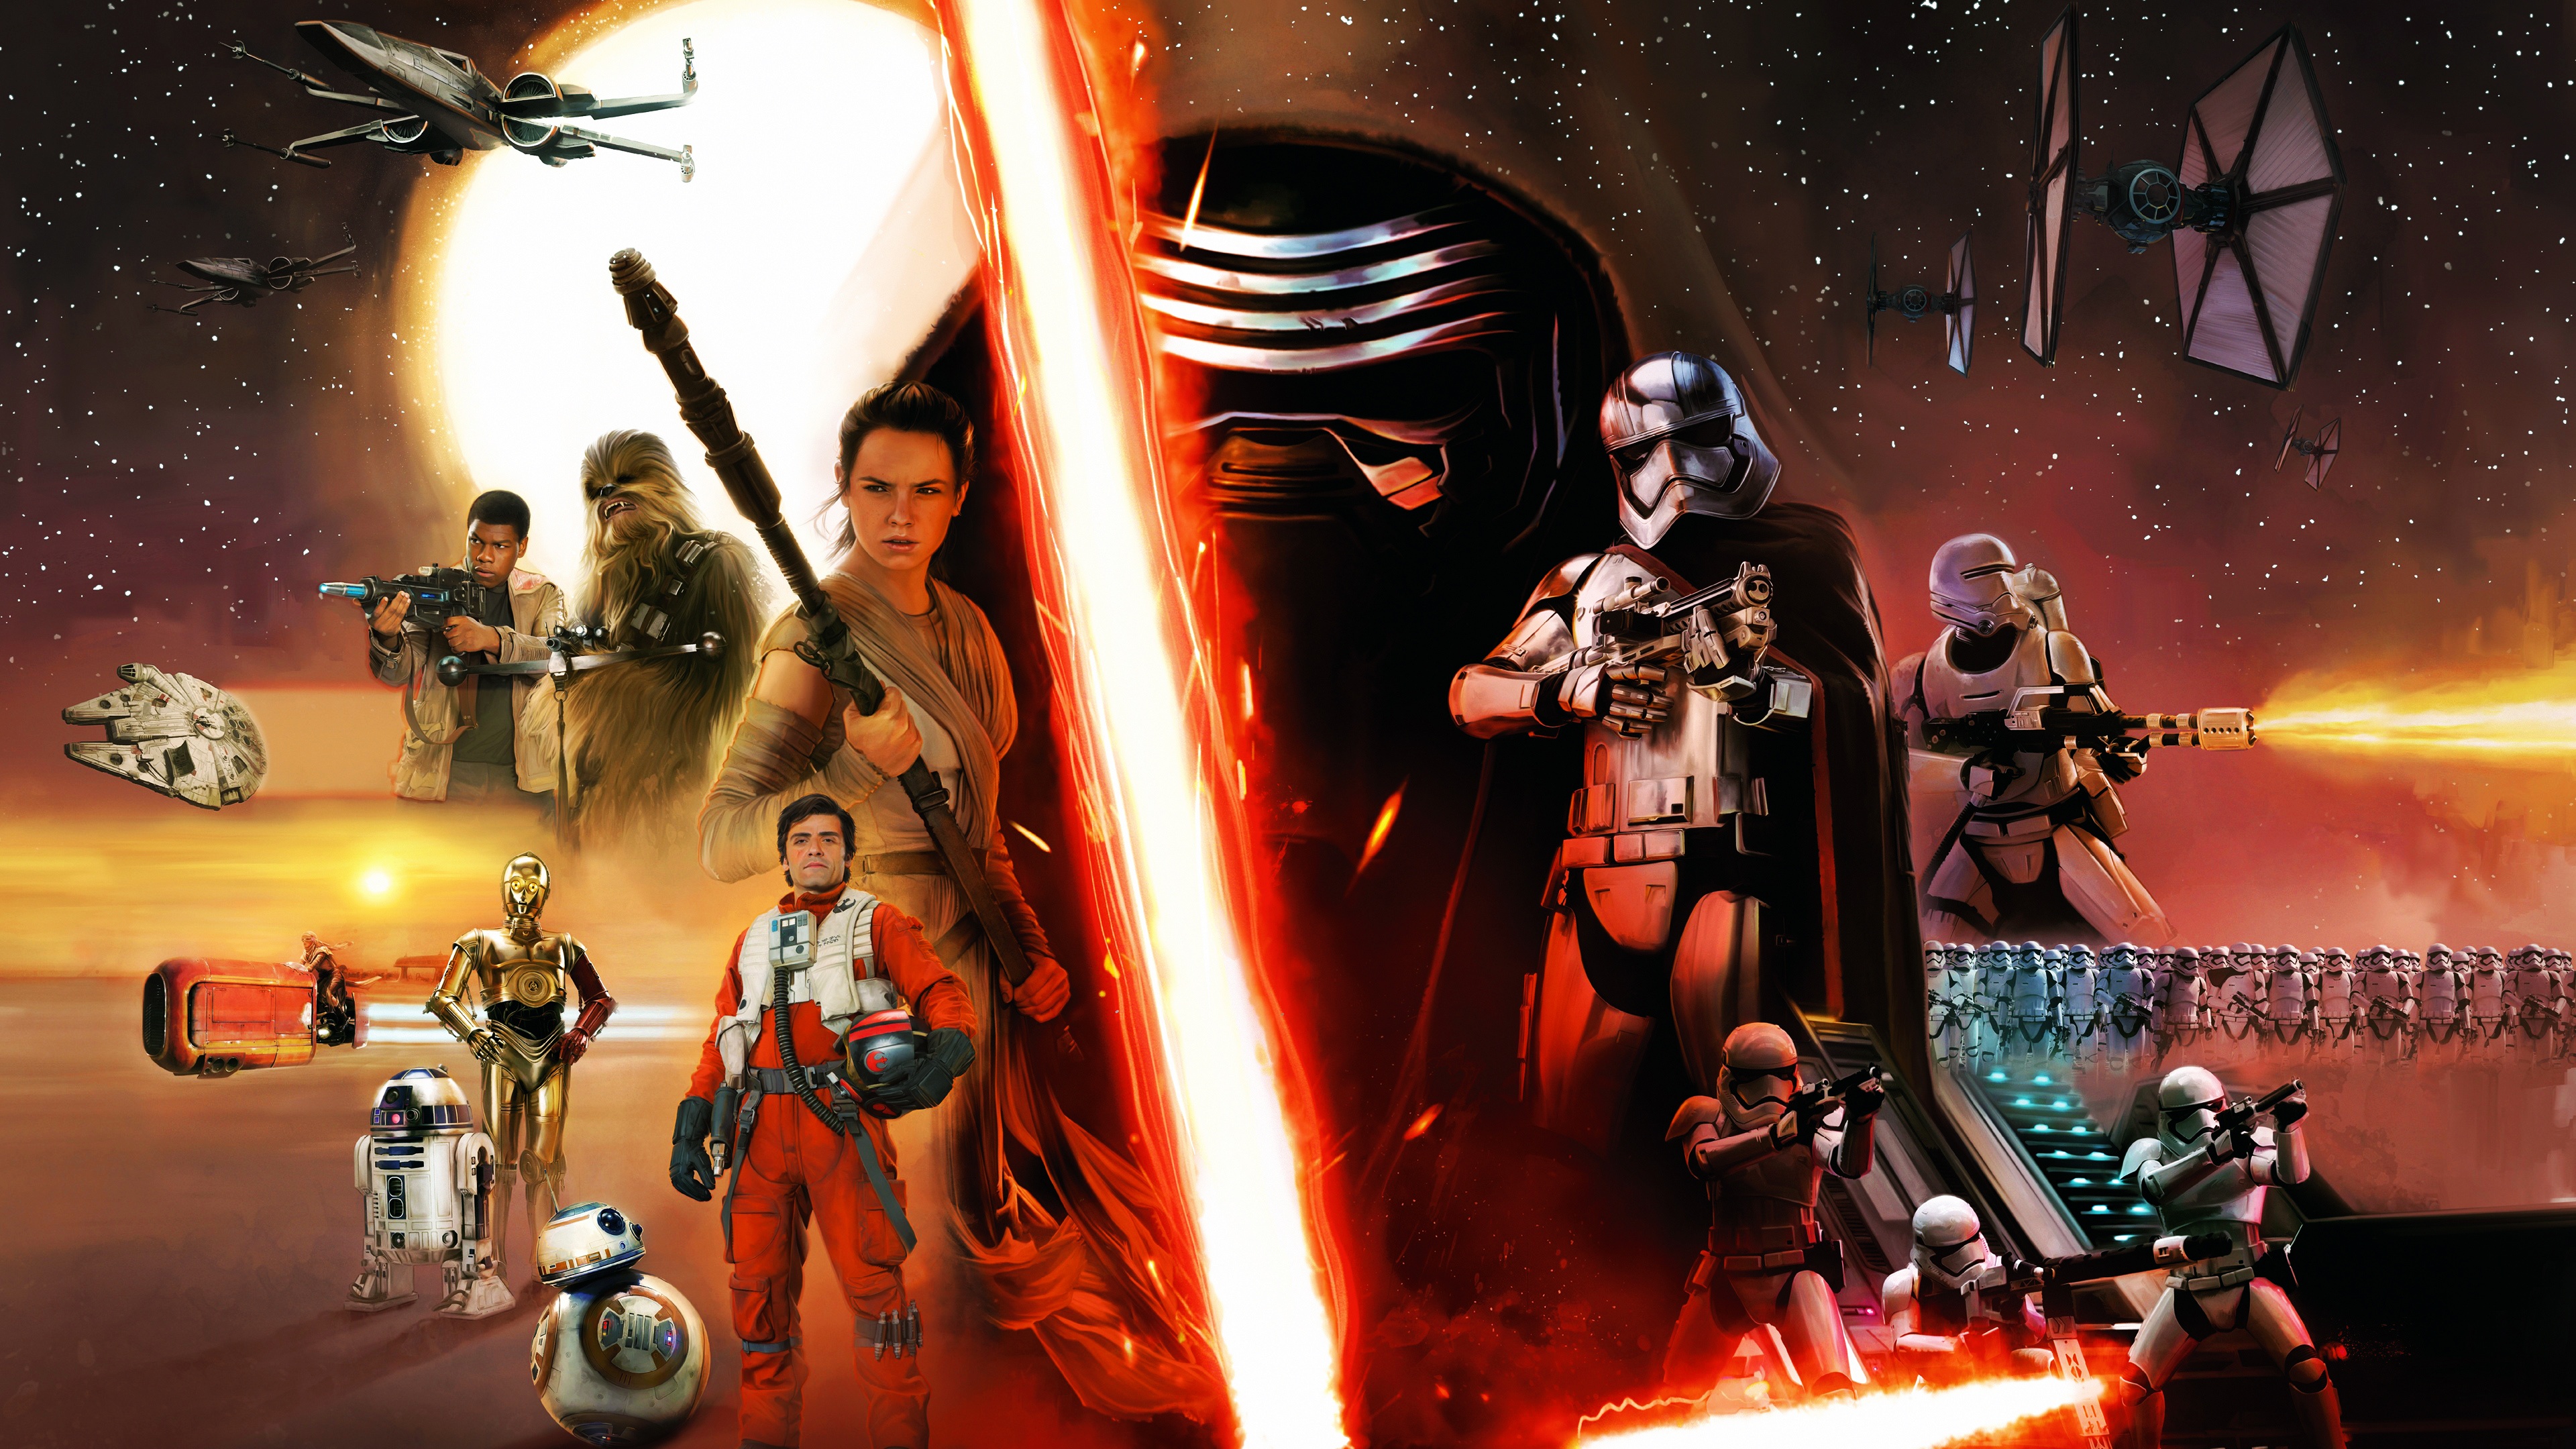  Wars Episode VII The Force Awakens Concept Wallpapers HD Wallpapers